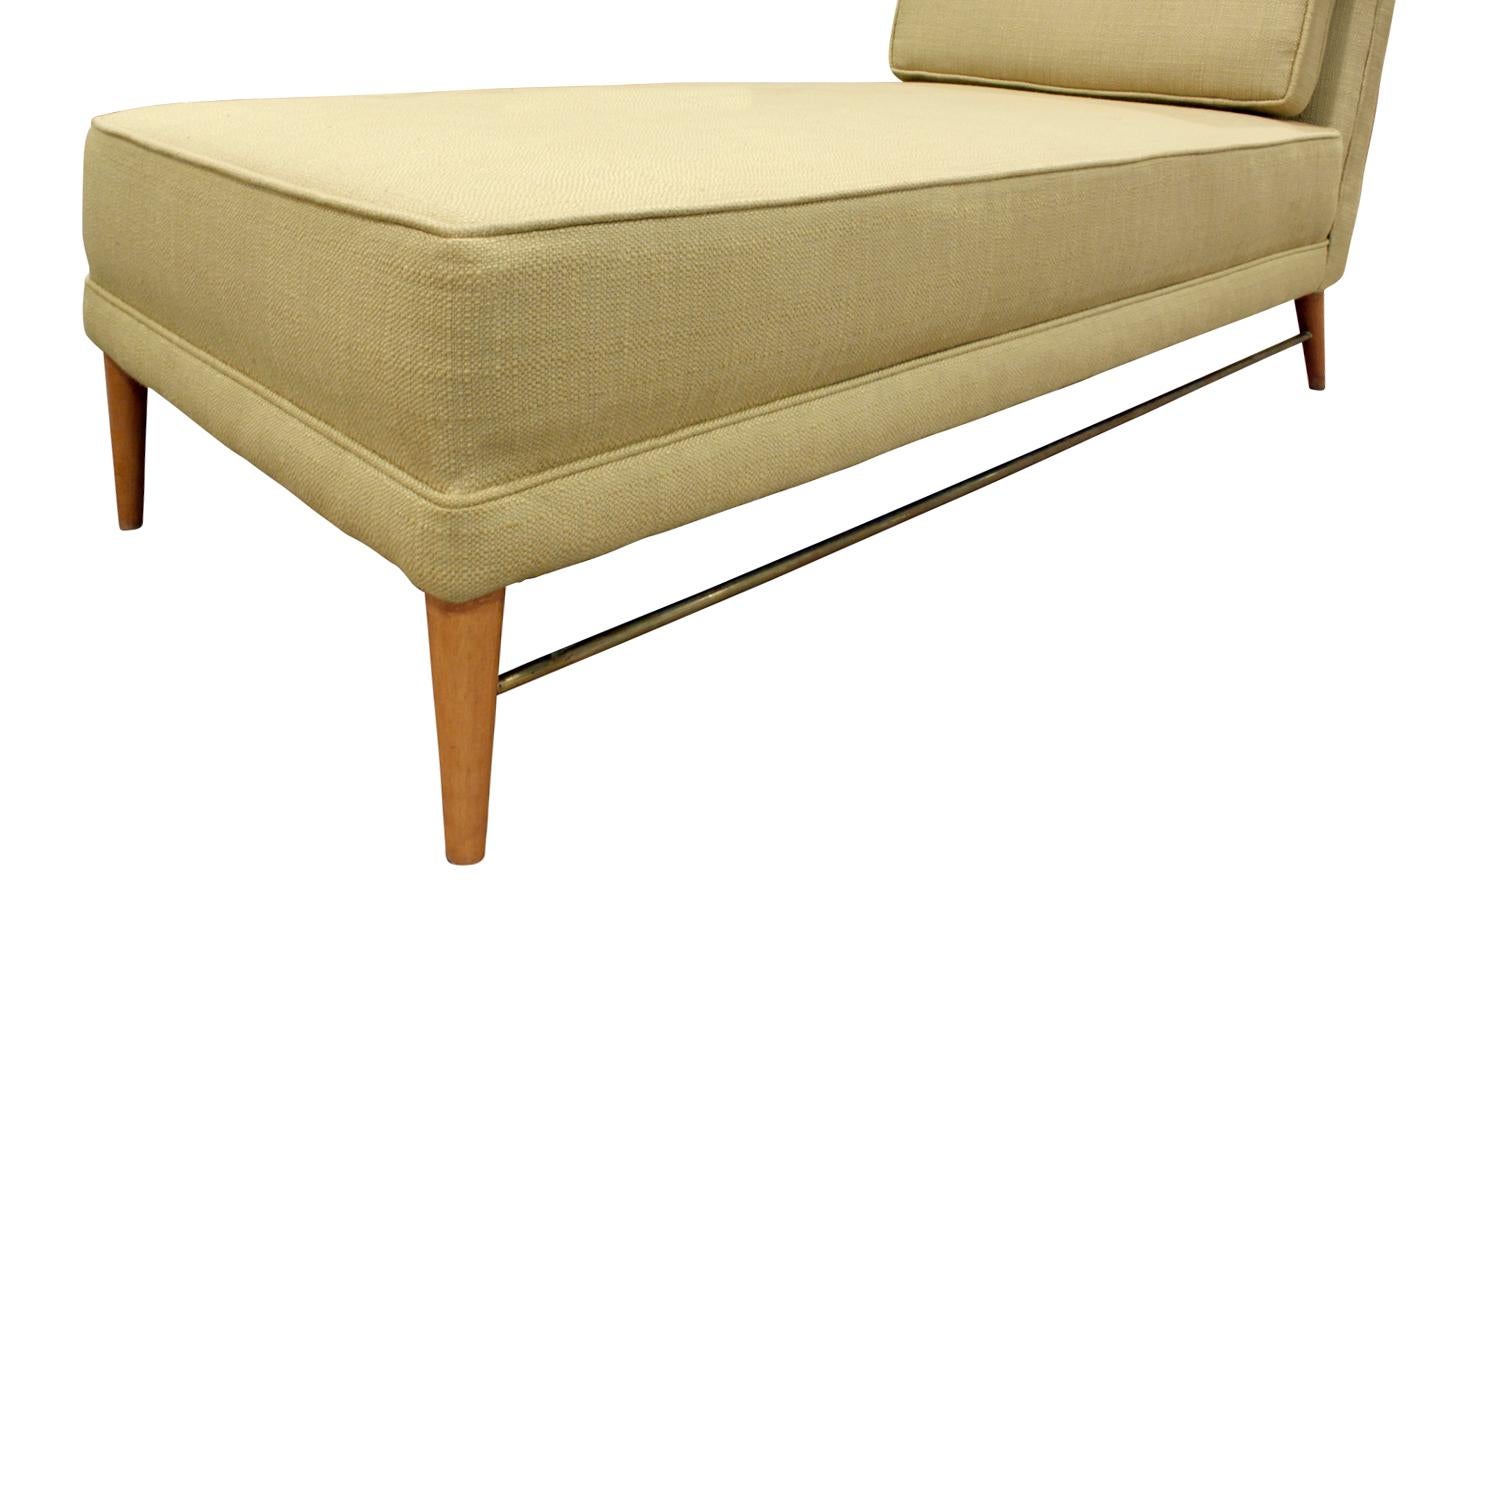 Hand-Crafted Paul McCobb Chaise with Mahogany Legs and Brass Stretchers, 1950s